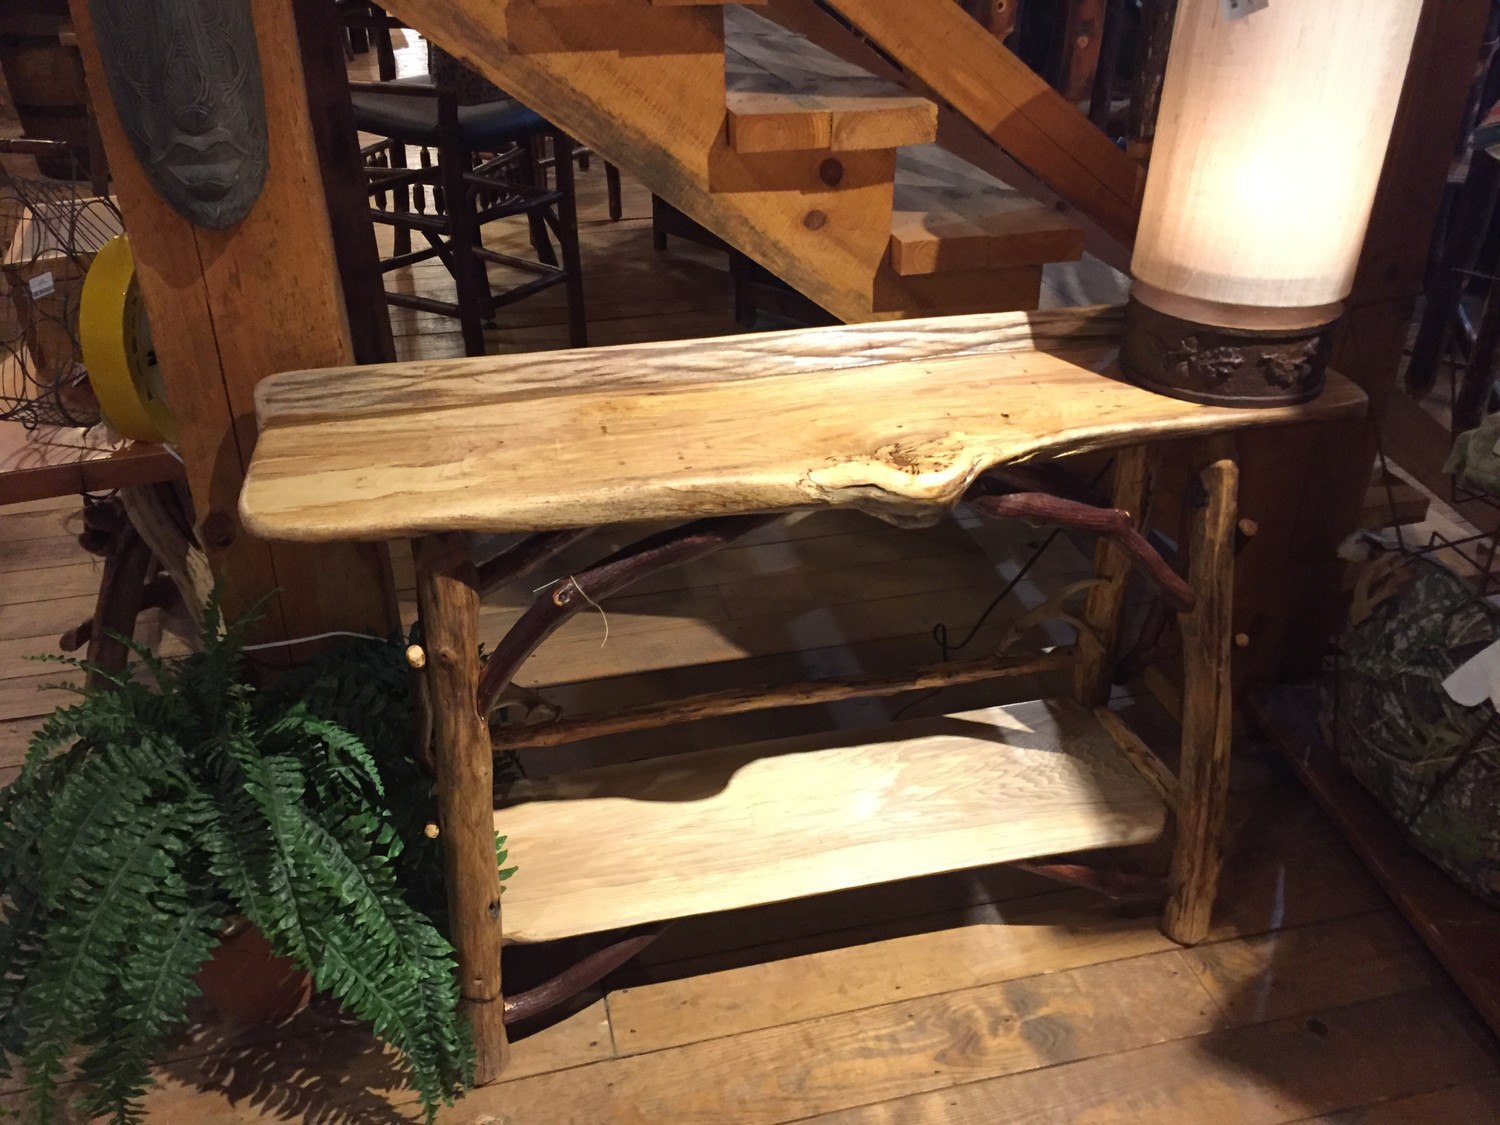 Sofa Table Pecan Slab with Locust and Laurel Base with Antler Decor